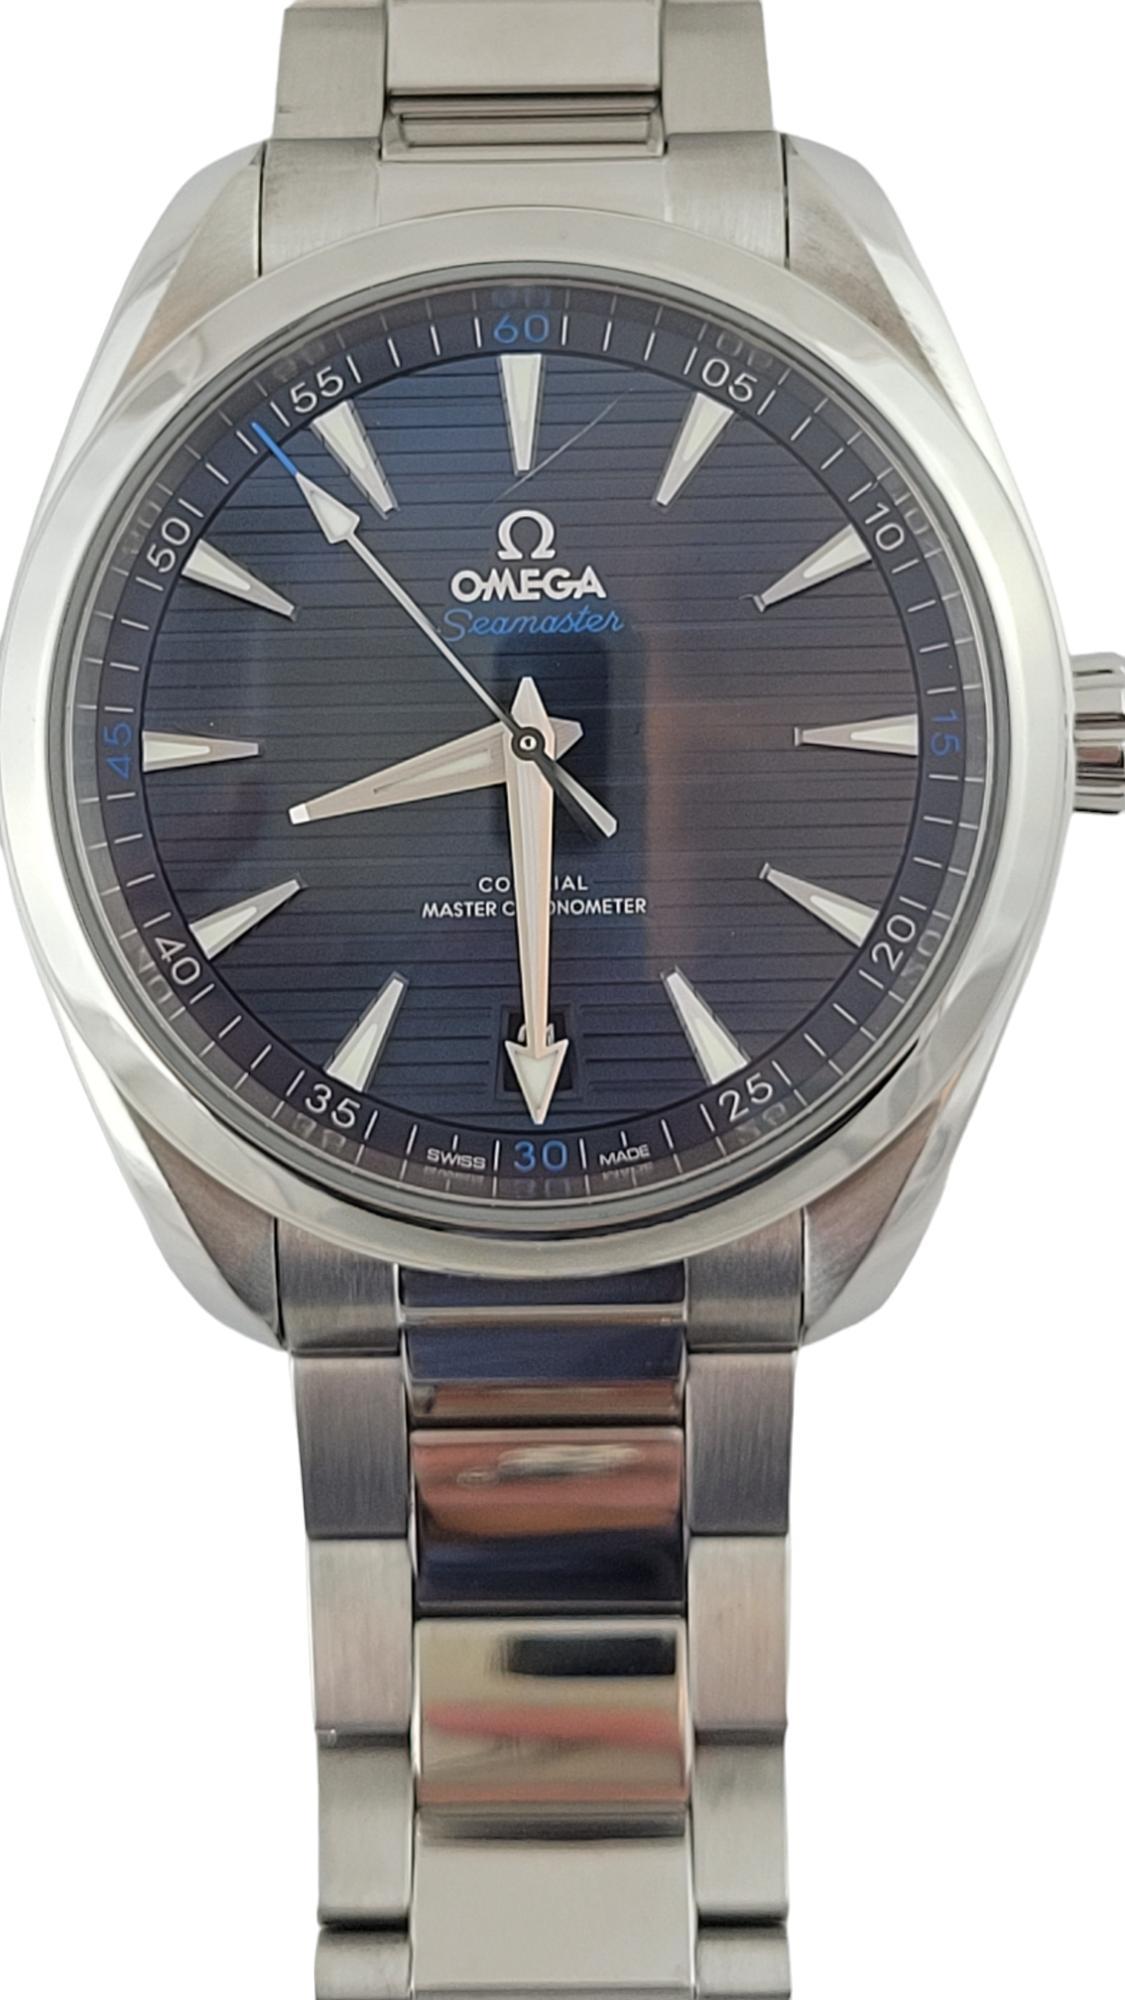 Omega Seamaster Aqua Terra Men's Watch

Model: 220.10.41.21.03.001
Serial: 83379007

Stainless steel band and case

Automatic movement

41 mm case

Blue dial silver markers

Stainless band fits up to 7 3/4